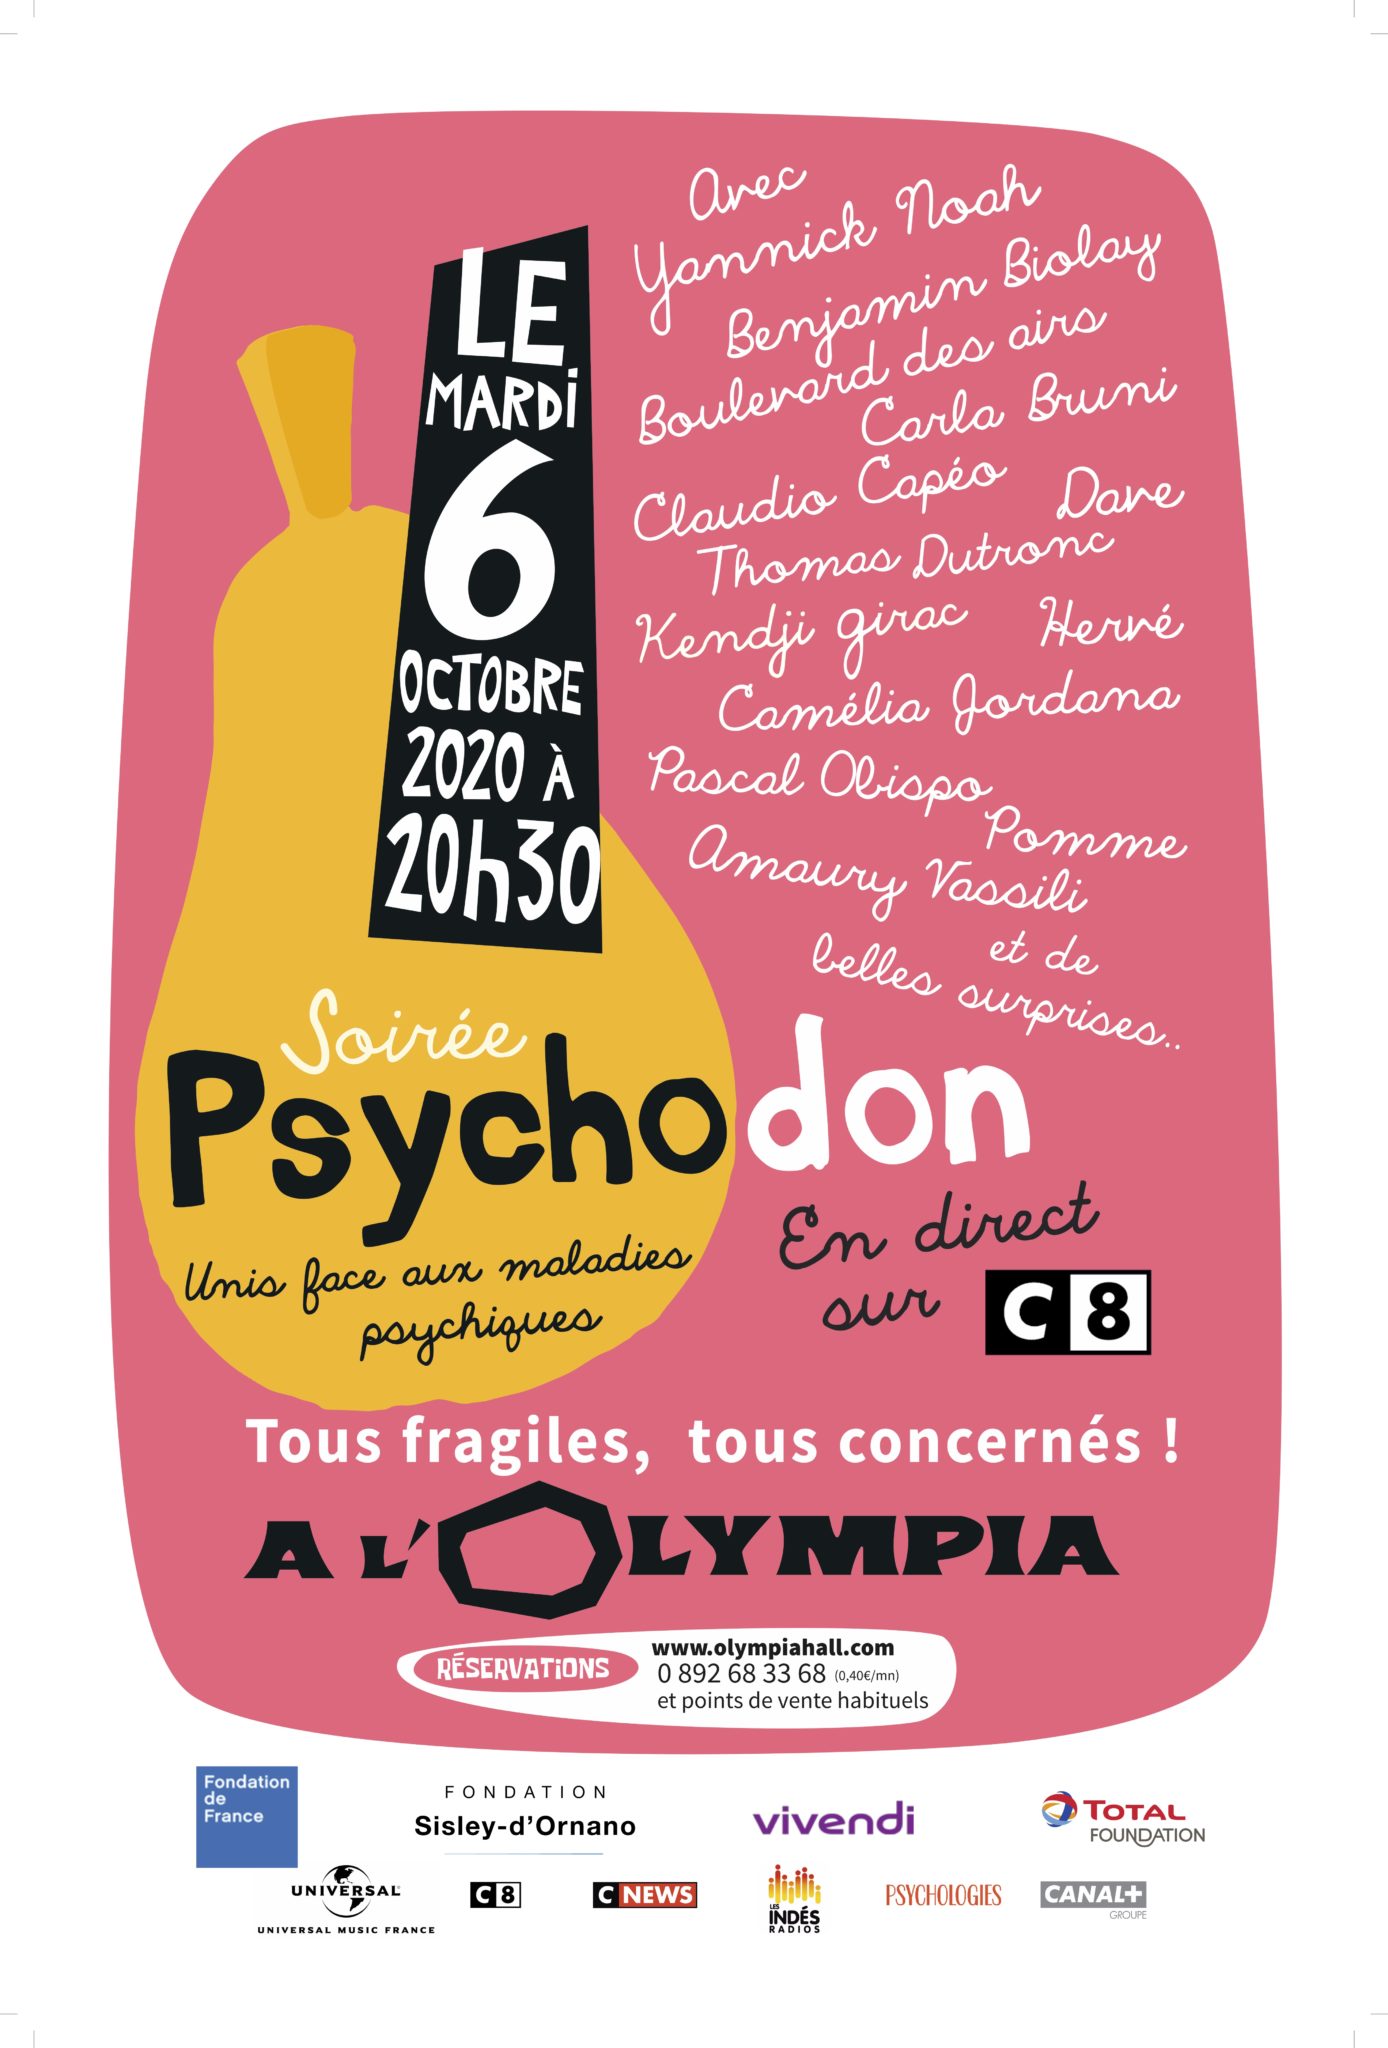 You are currently viewing 15-09-2020 : Le Cnigem soutient le Psychodon !